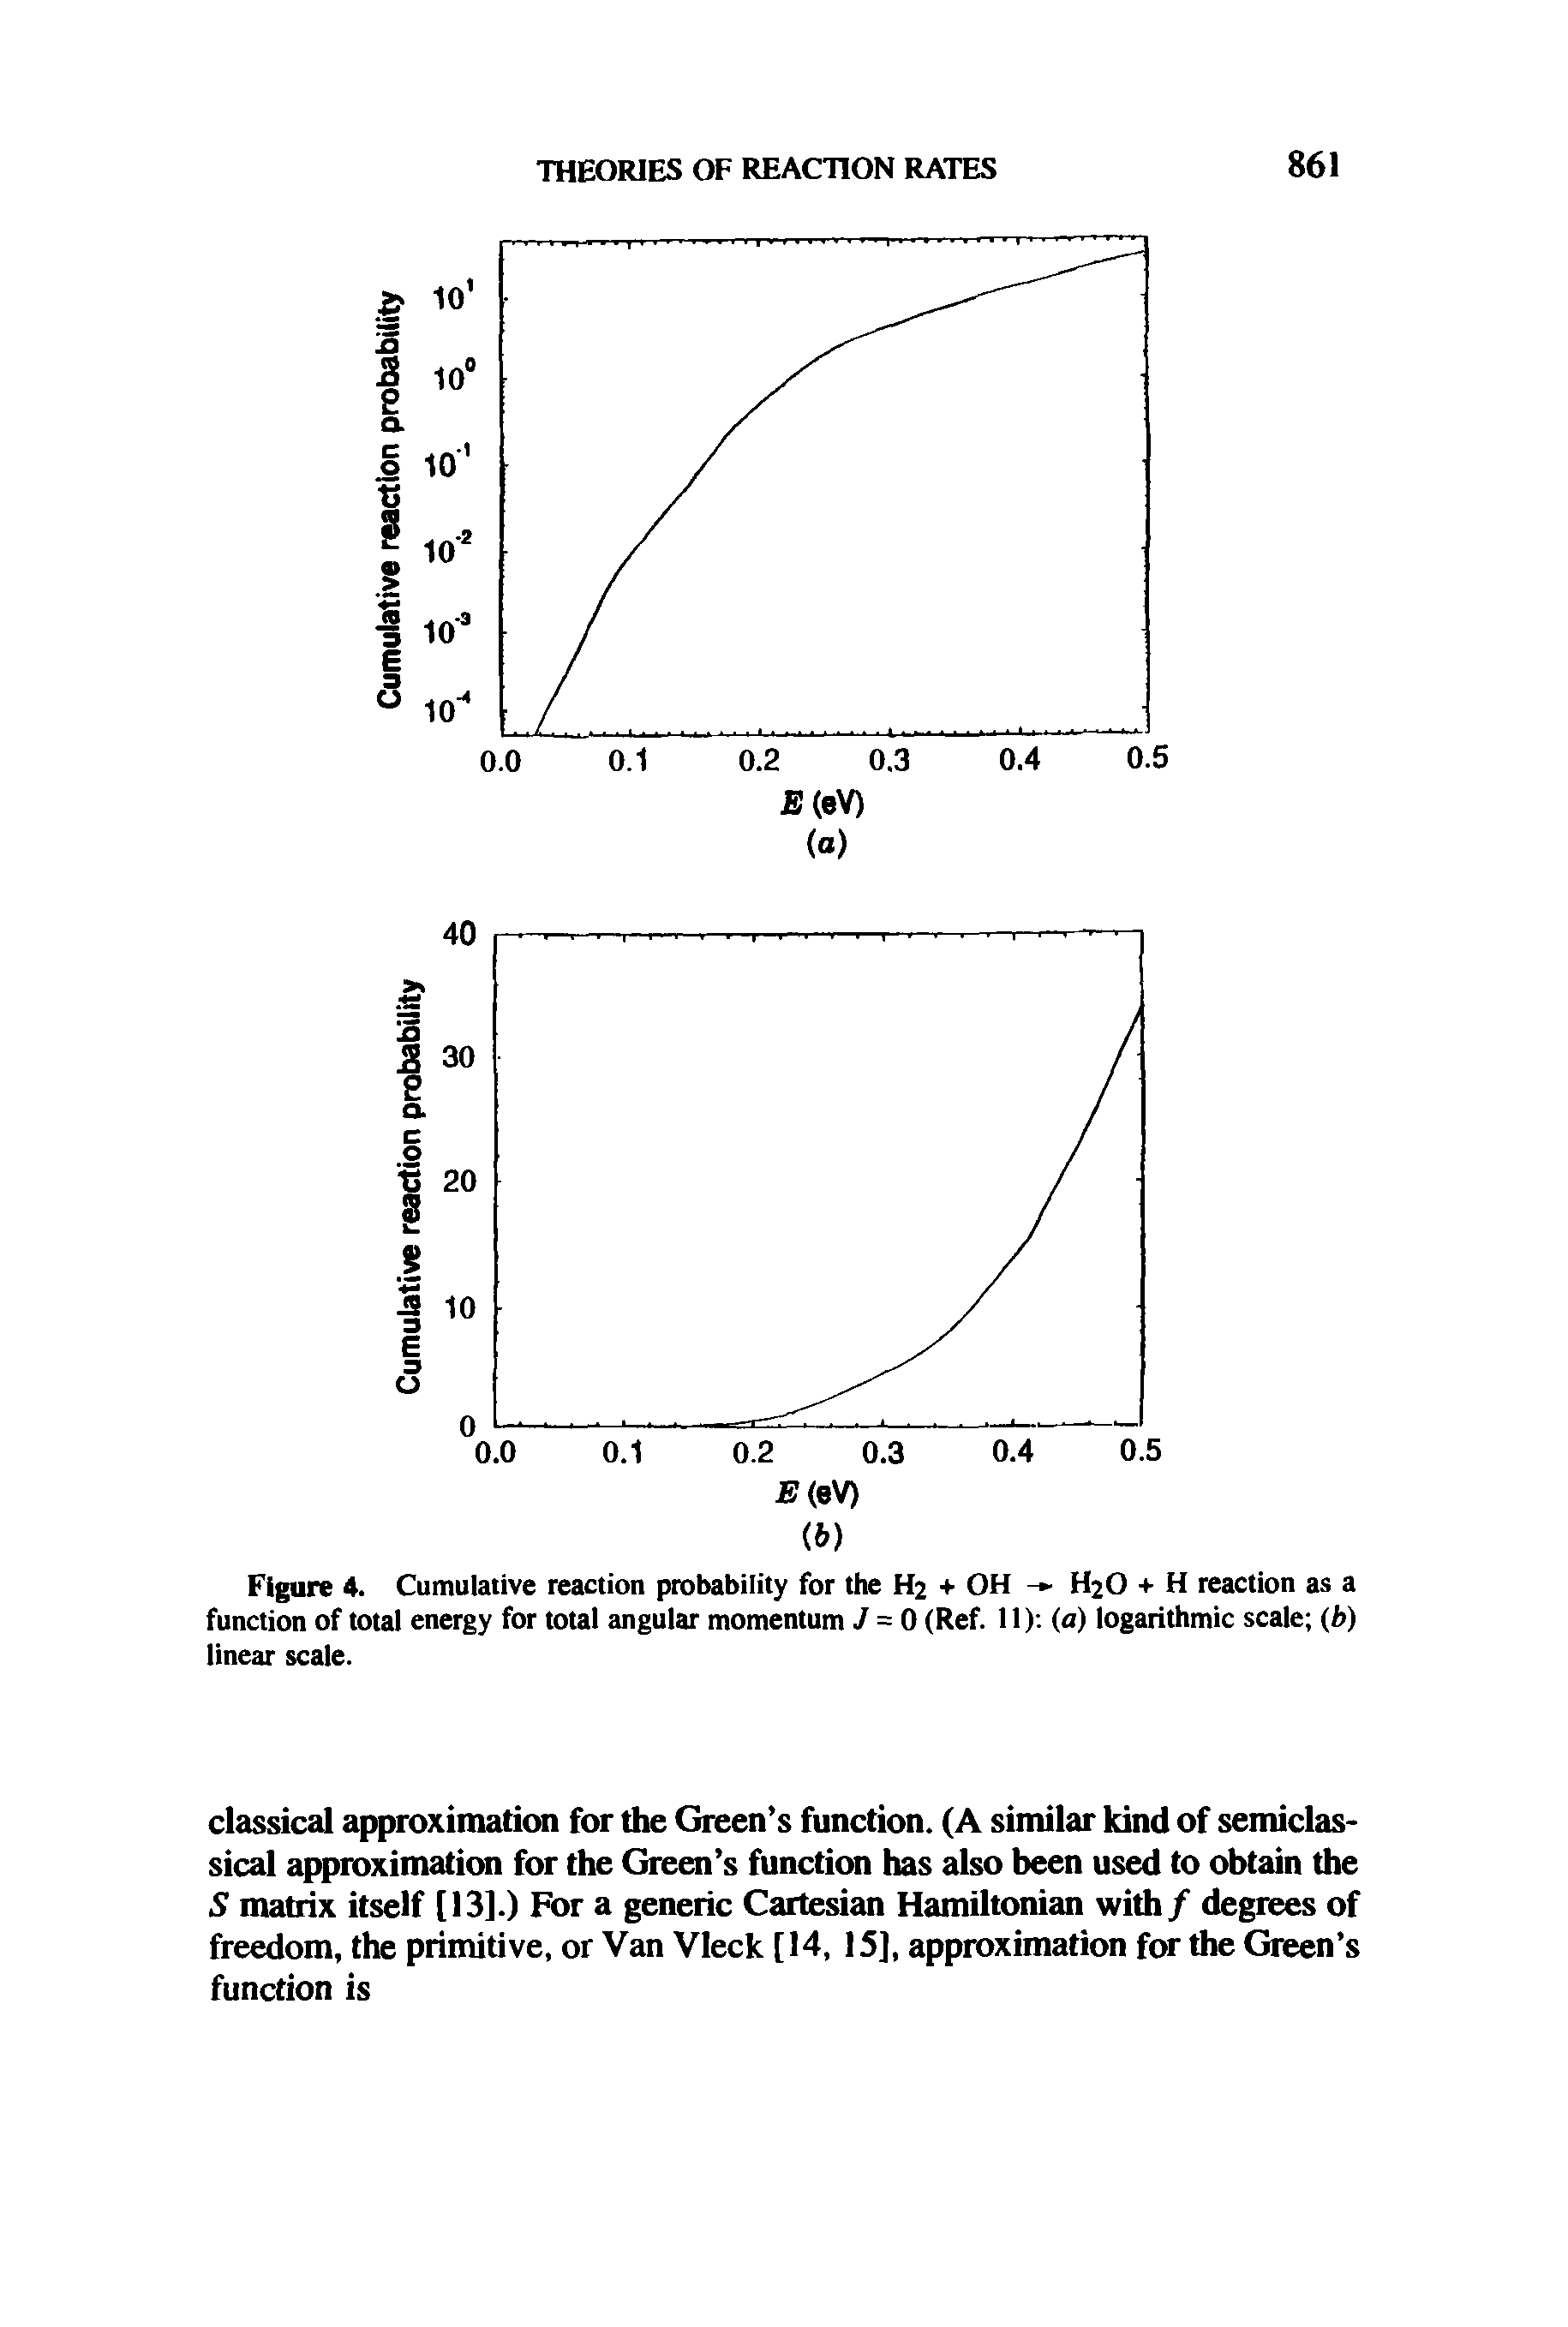 Figure 4. Cumulative reaction probability for the H2 + OH - H2O + H reaction as a function of total energy for total angular momentum 7 = 0 (Ref. 11) (a) logarithmic scale (b) linear scale.